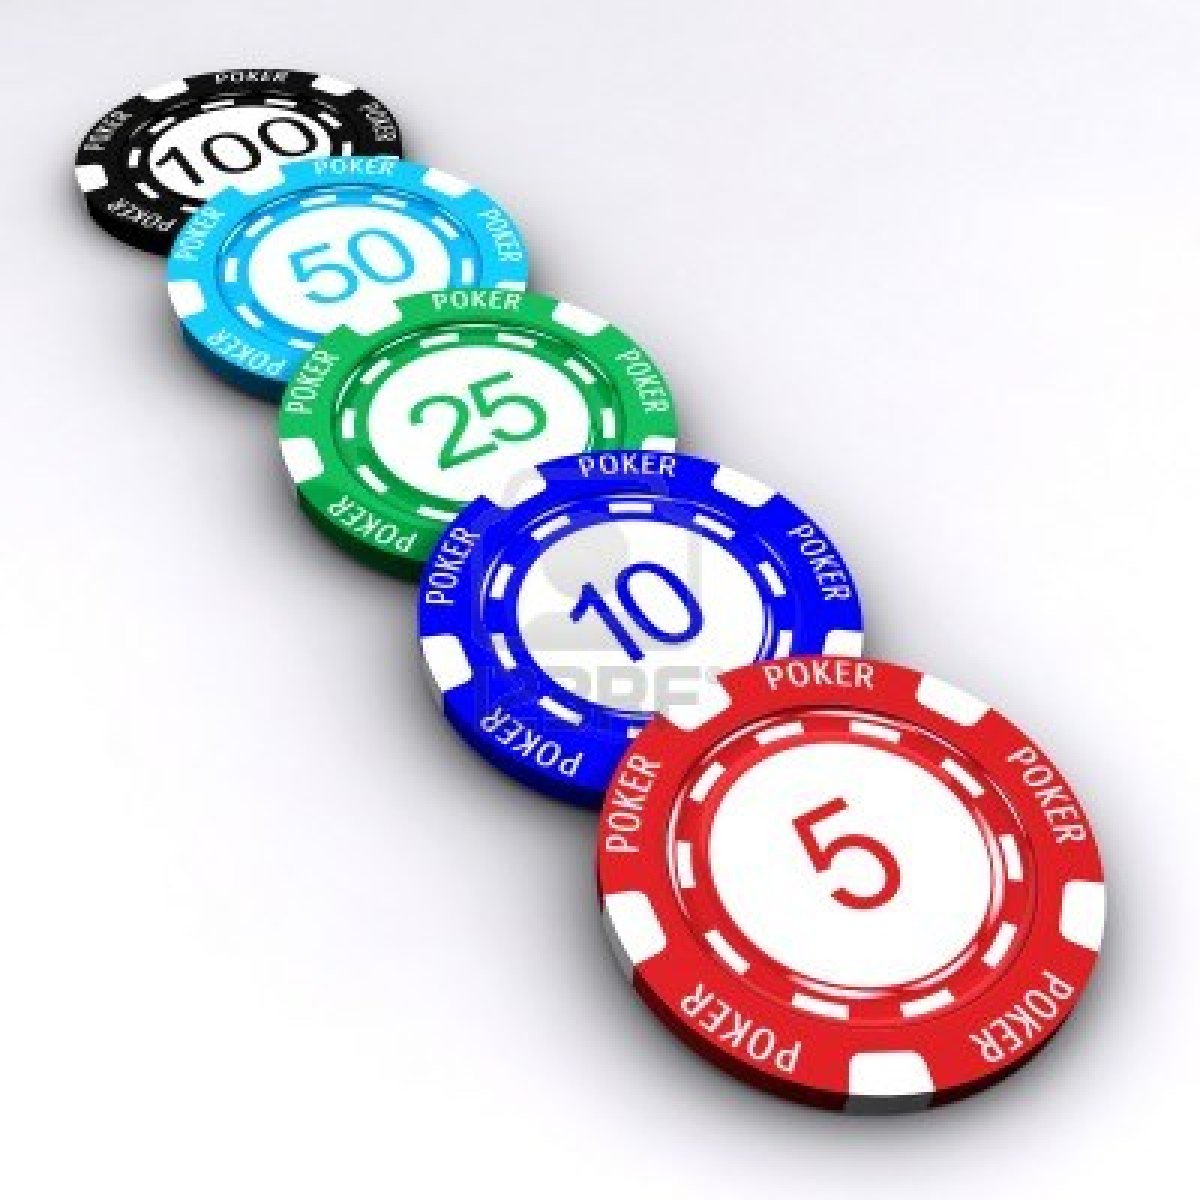 15407897-3d-poker-chips-with-numbers-on-